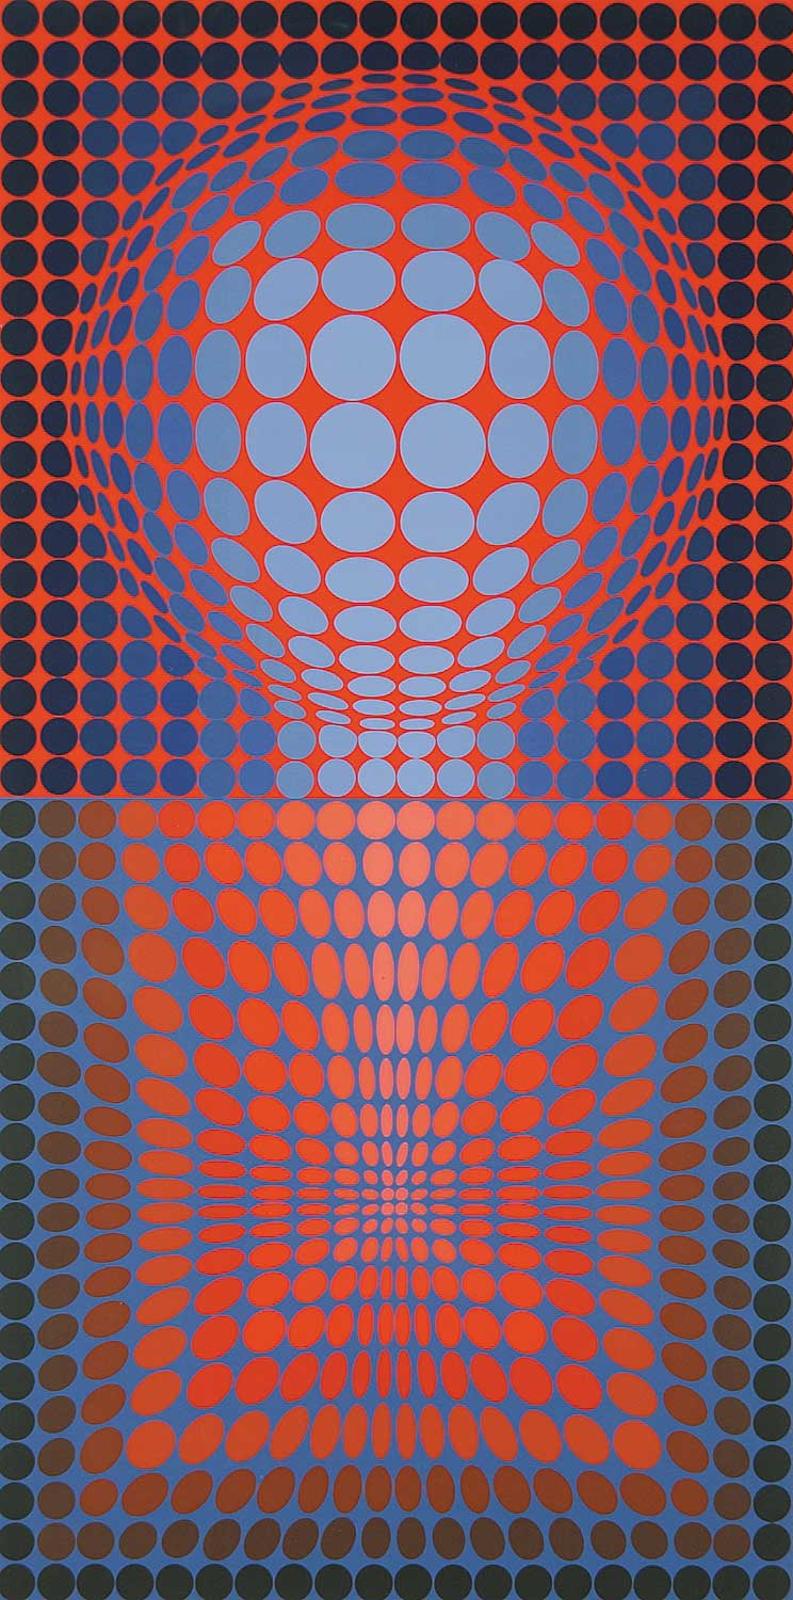 Victor Vasarely (1906-1997) - Untitled Vega  #E.A.